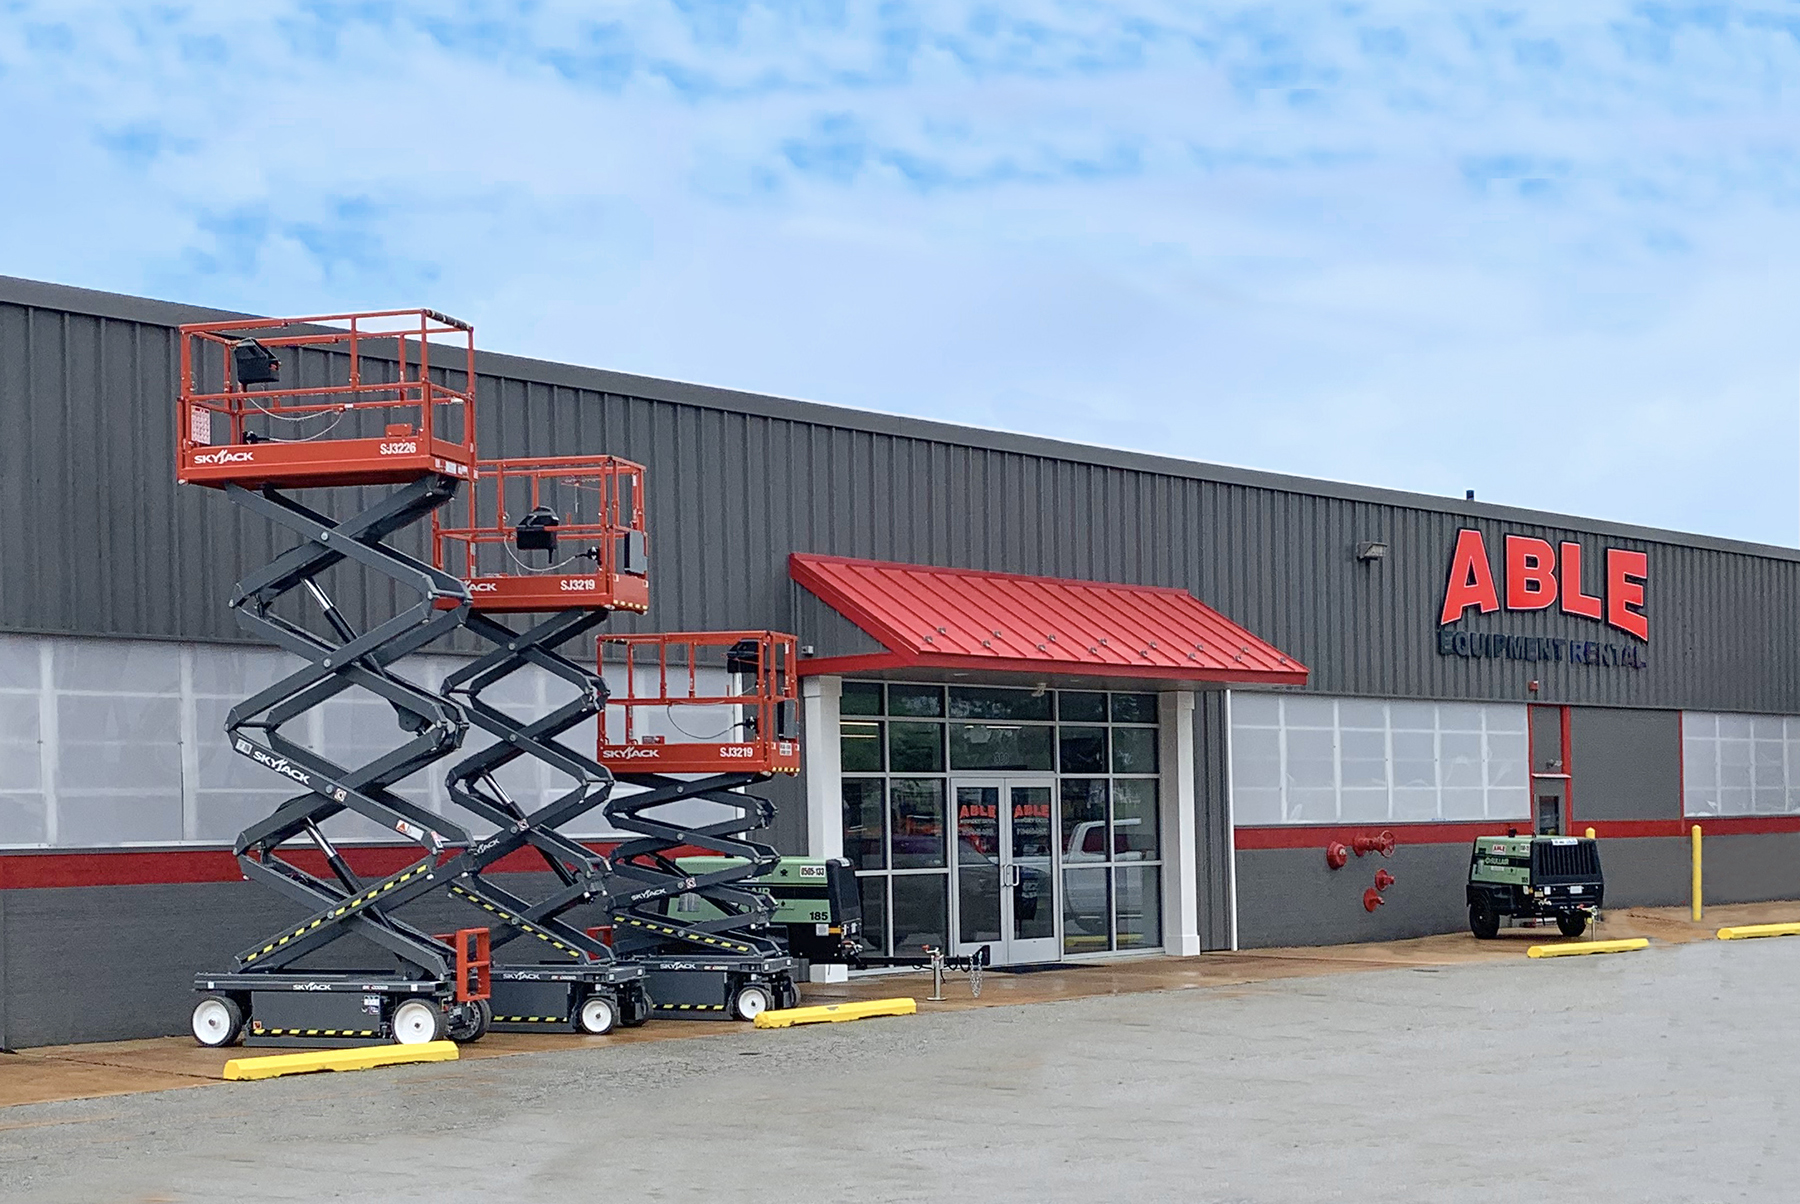 ABLE Equipment Rental's New Building in West Chester, PA